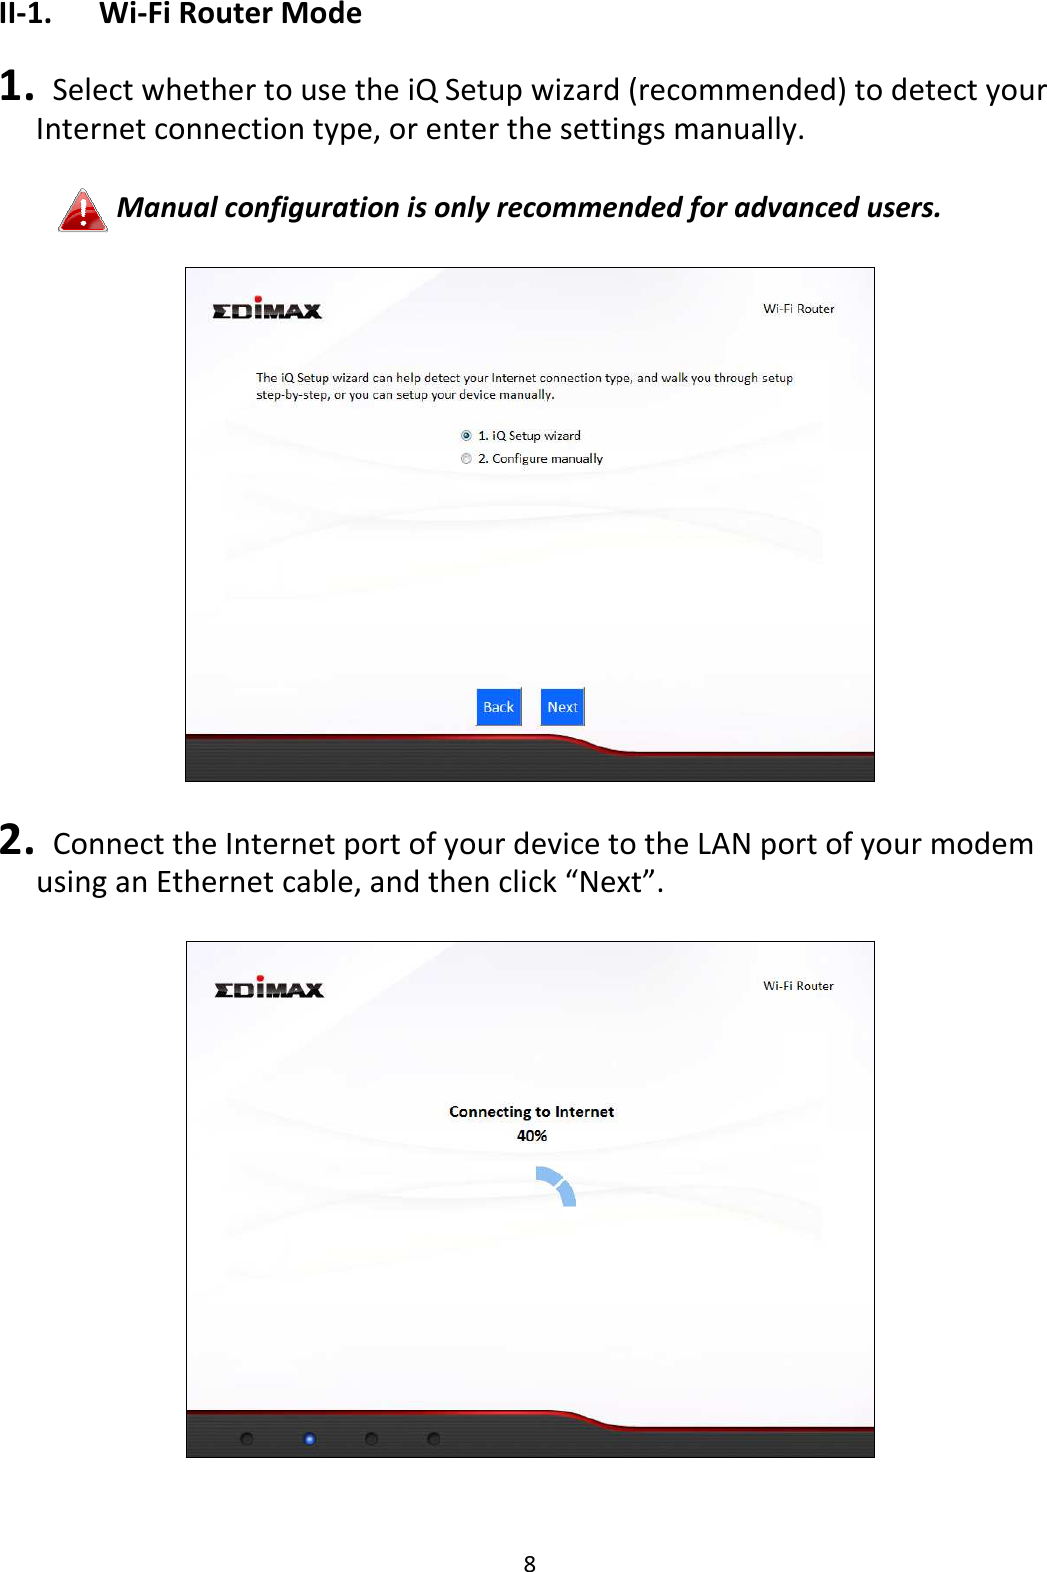 8 II-1.  Wi-Fi Router Mode  1.   Select whether to use the iQ Setup wizard (recommended) to detect your Internet connection type, or enter the settings manually.  Manual configuration is only recommended for advanced users.    2.   Connect the Internet port of your device to the LAN port of your modem using an Ethernet cable, and then click “Next”.    